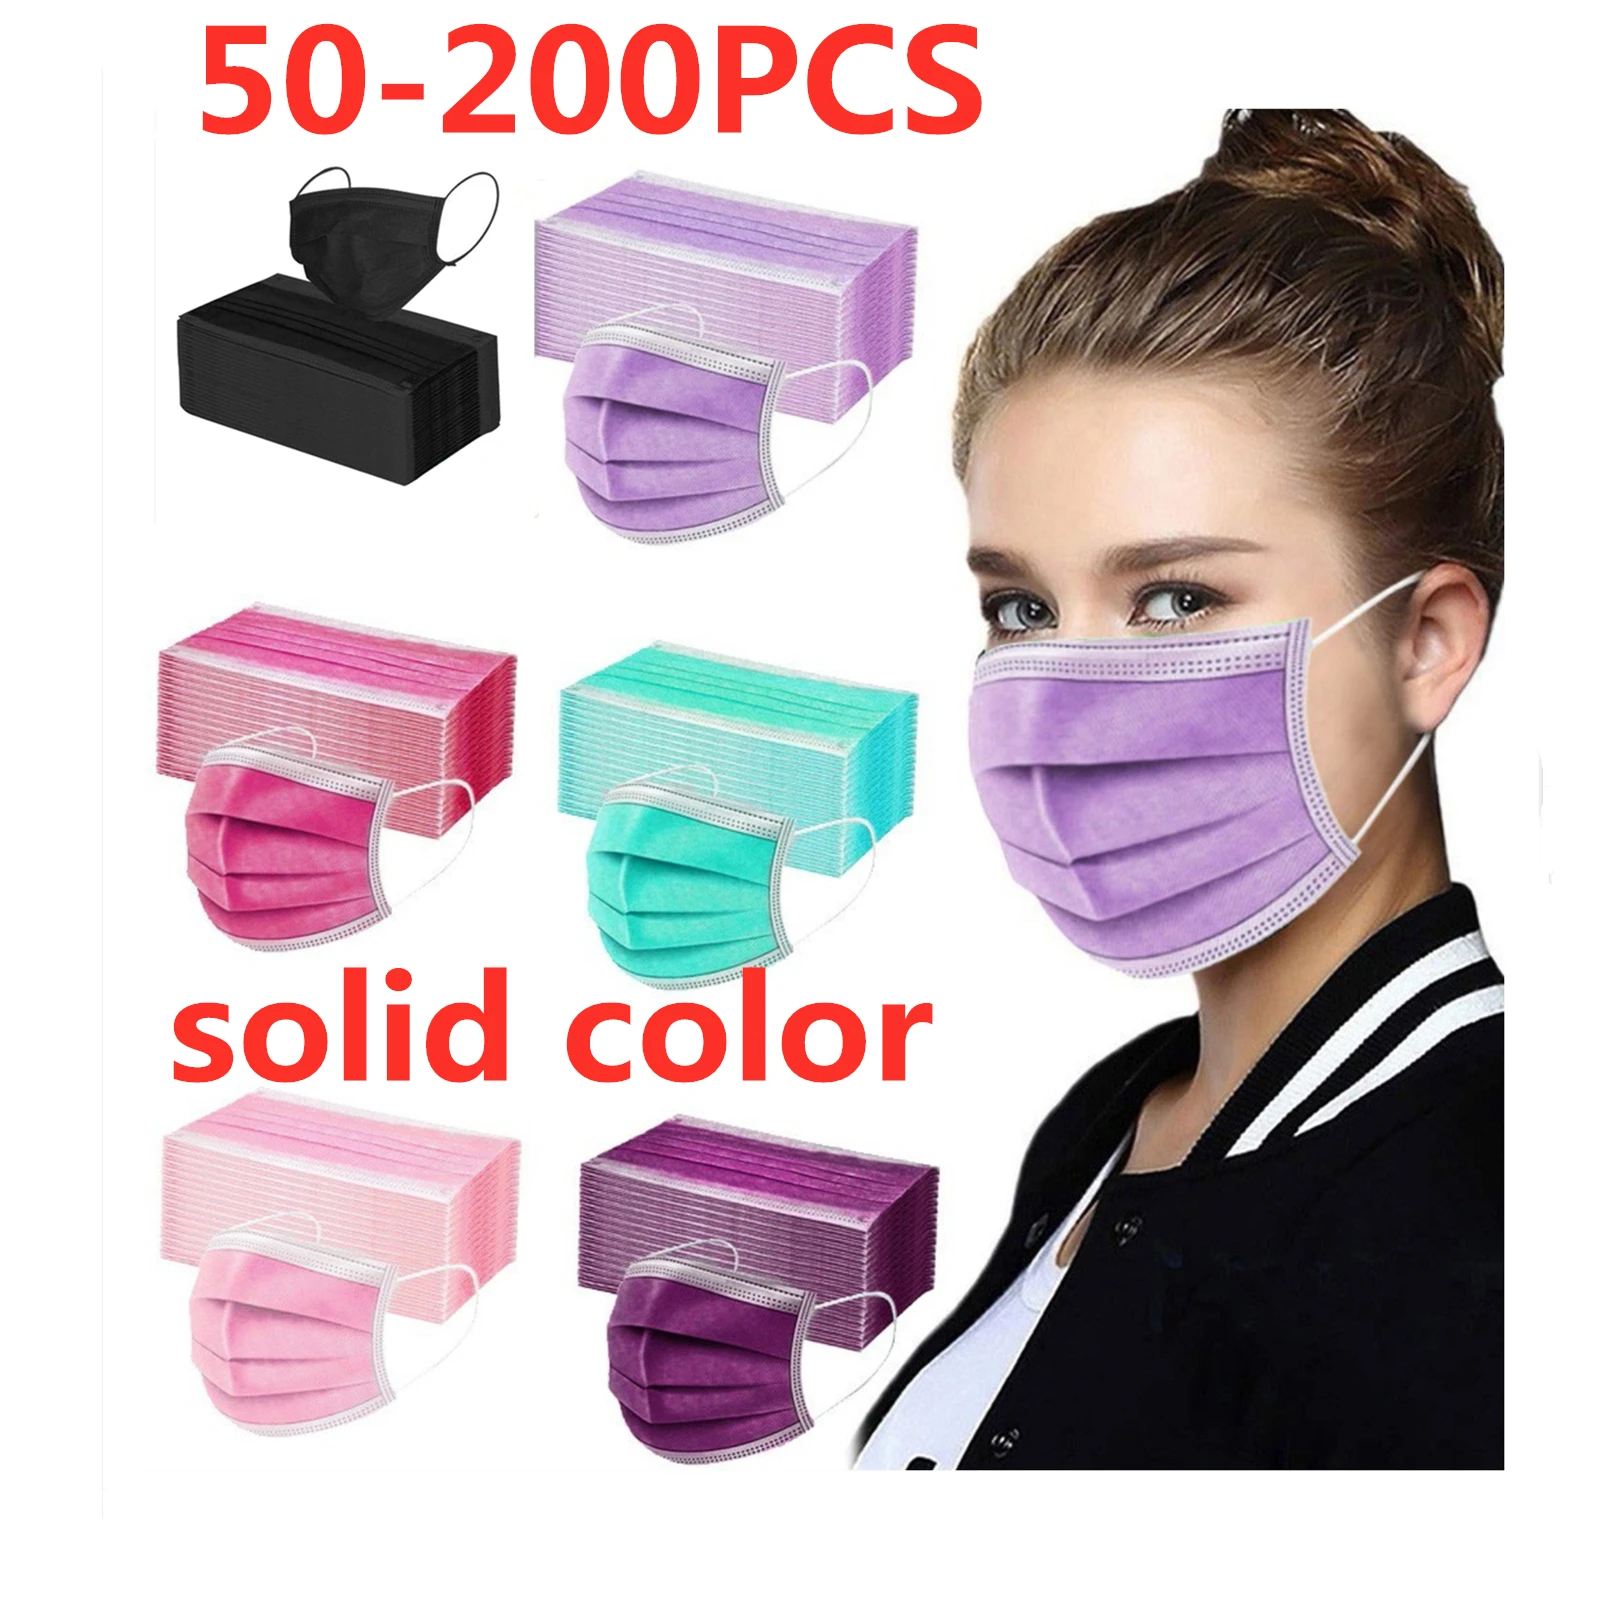 

50-200pcs Women Man Solid Masks Disposable Face Mask 3ply Earloop Mouth Masks Halloween Cosplay Anti-pm2.5 Mascarillas Masques